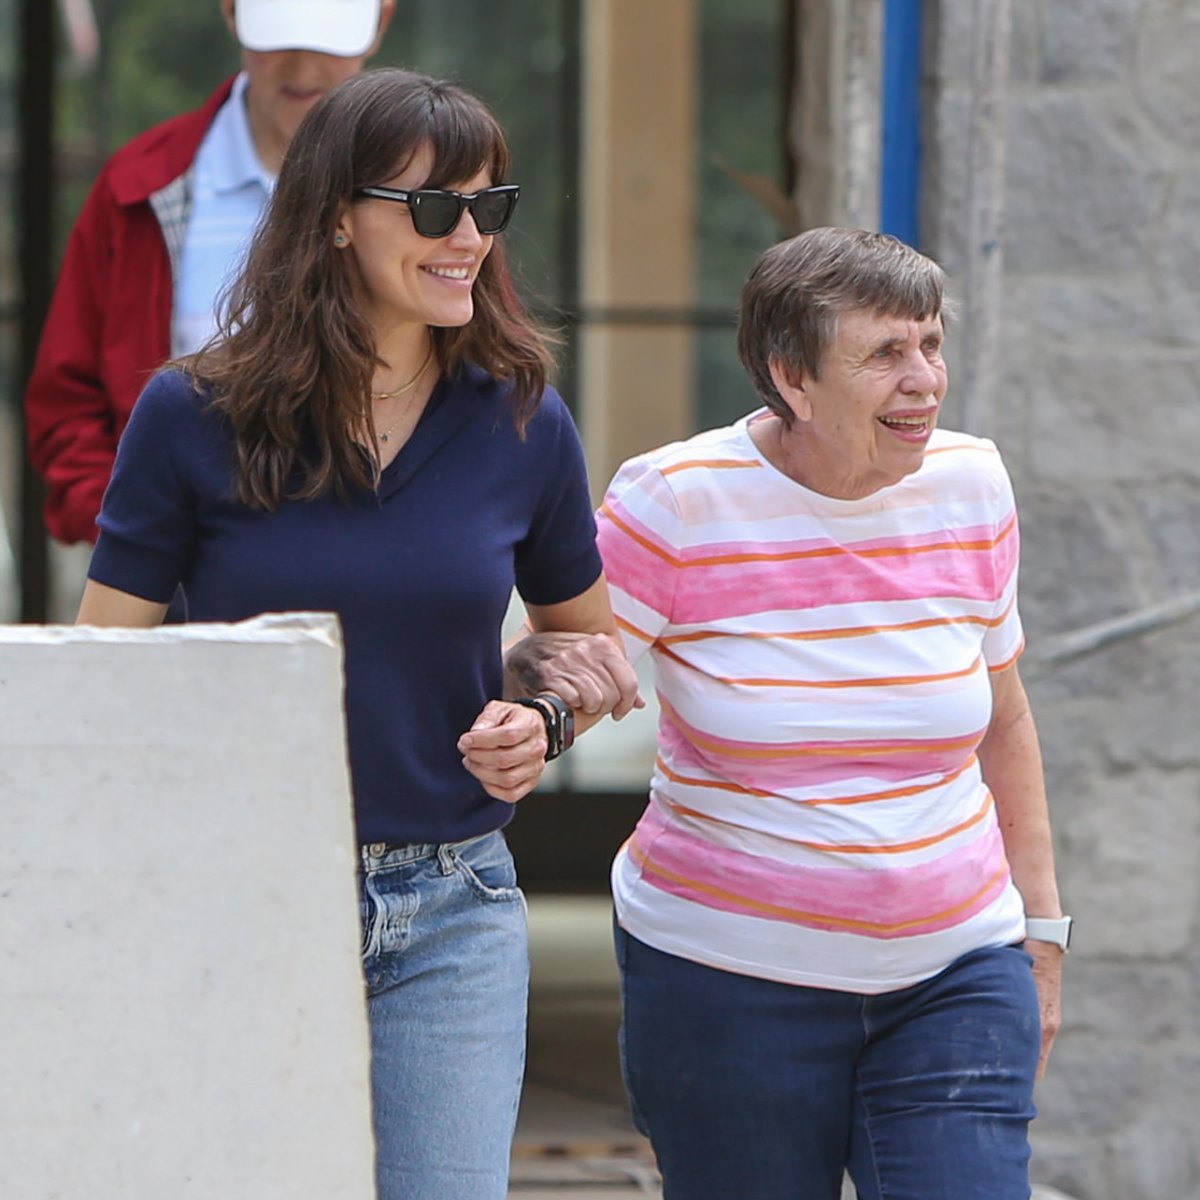 Jennifer Garner Reveals What is in Her Purse After Family Road Trip